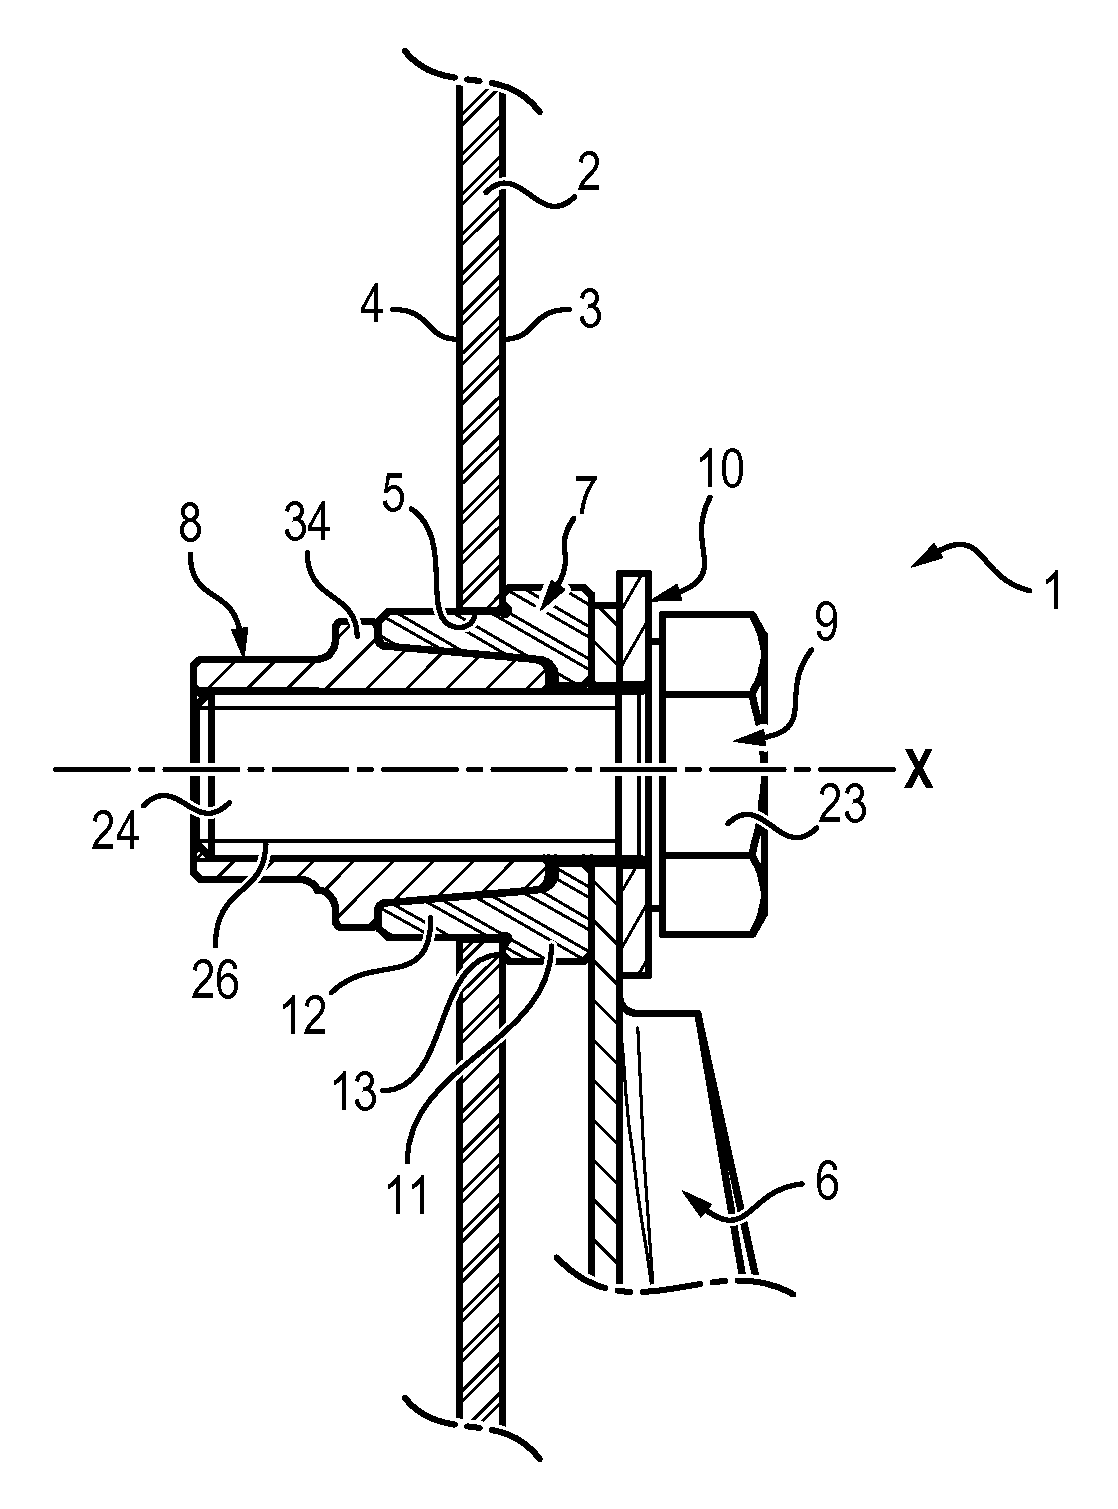 Device for fixing an electrical connection terminal to a support